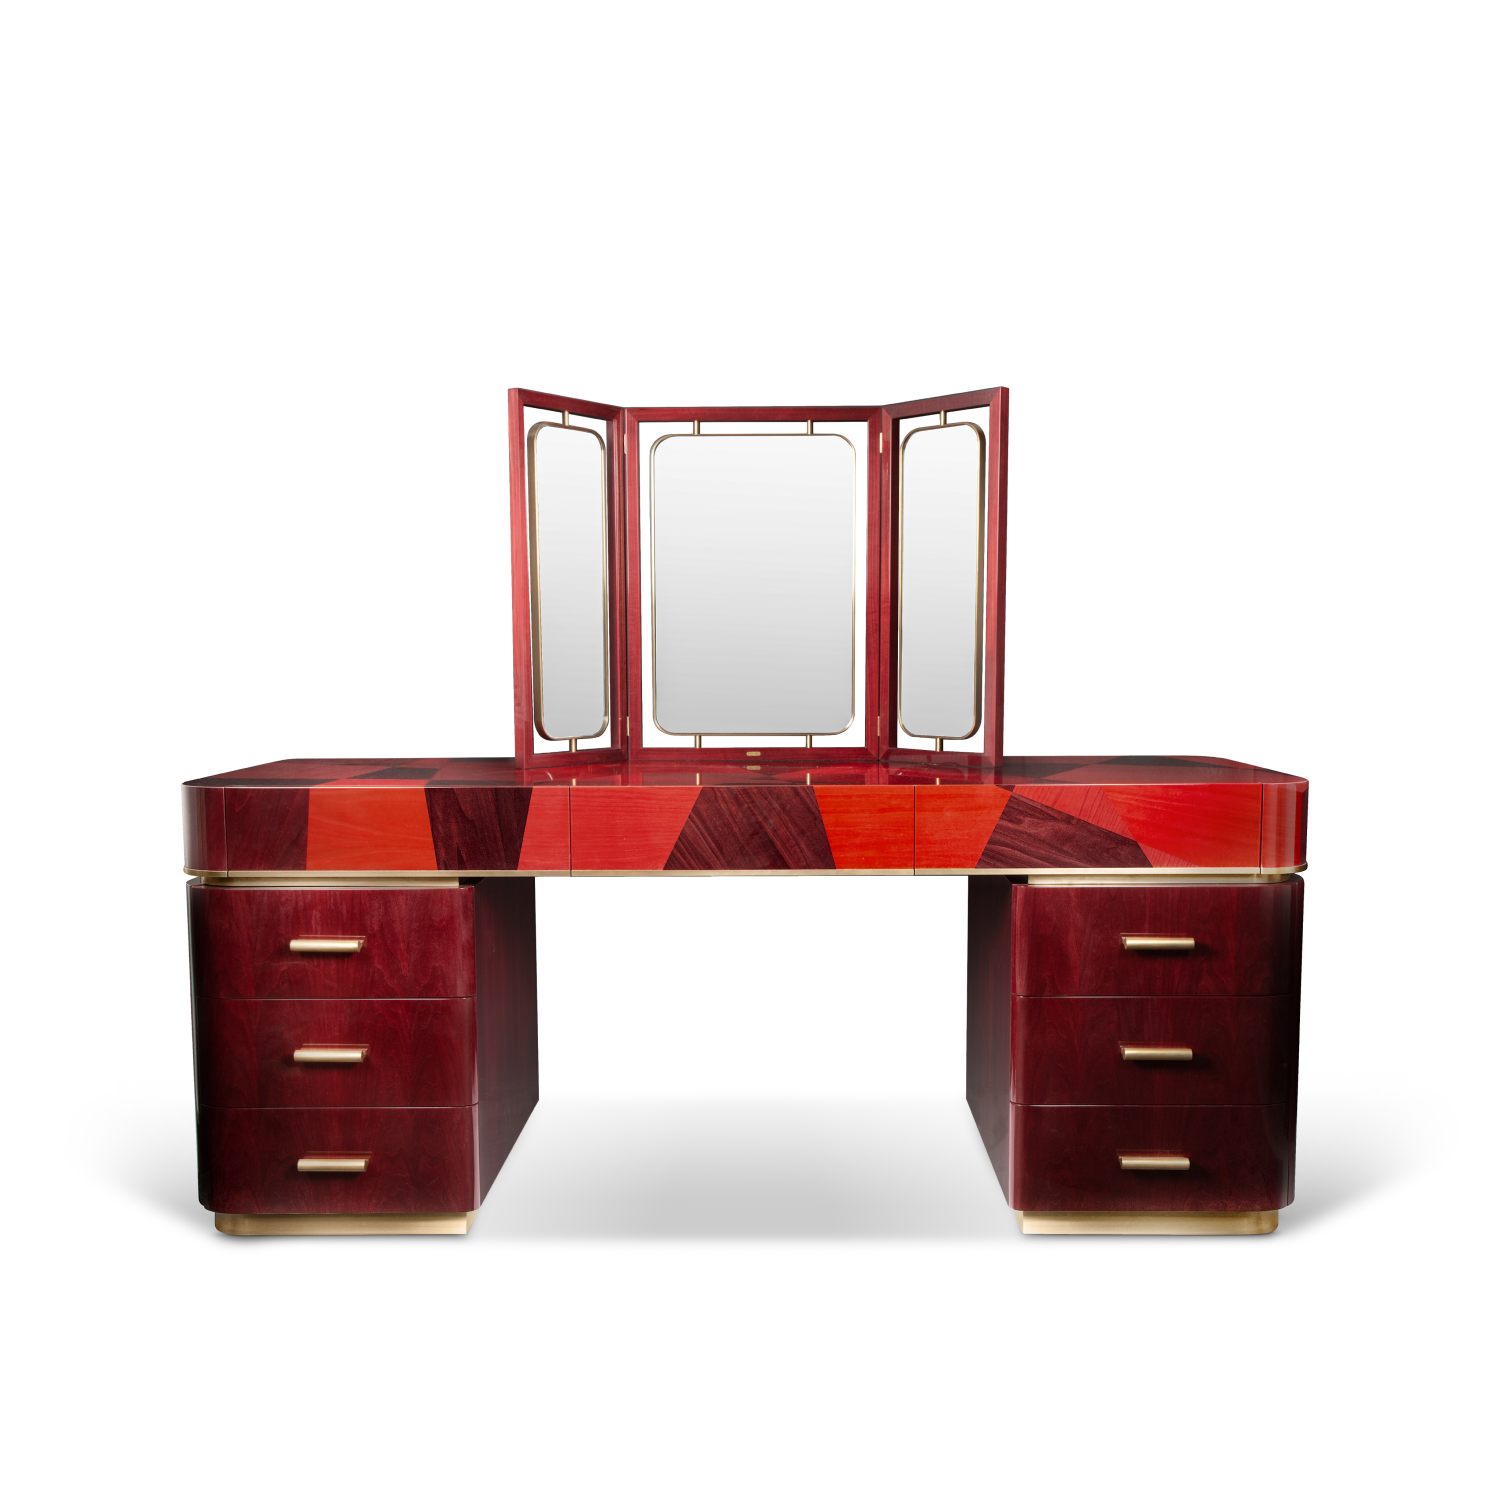 Procreo Spadille Desk Front View With Mirror.